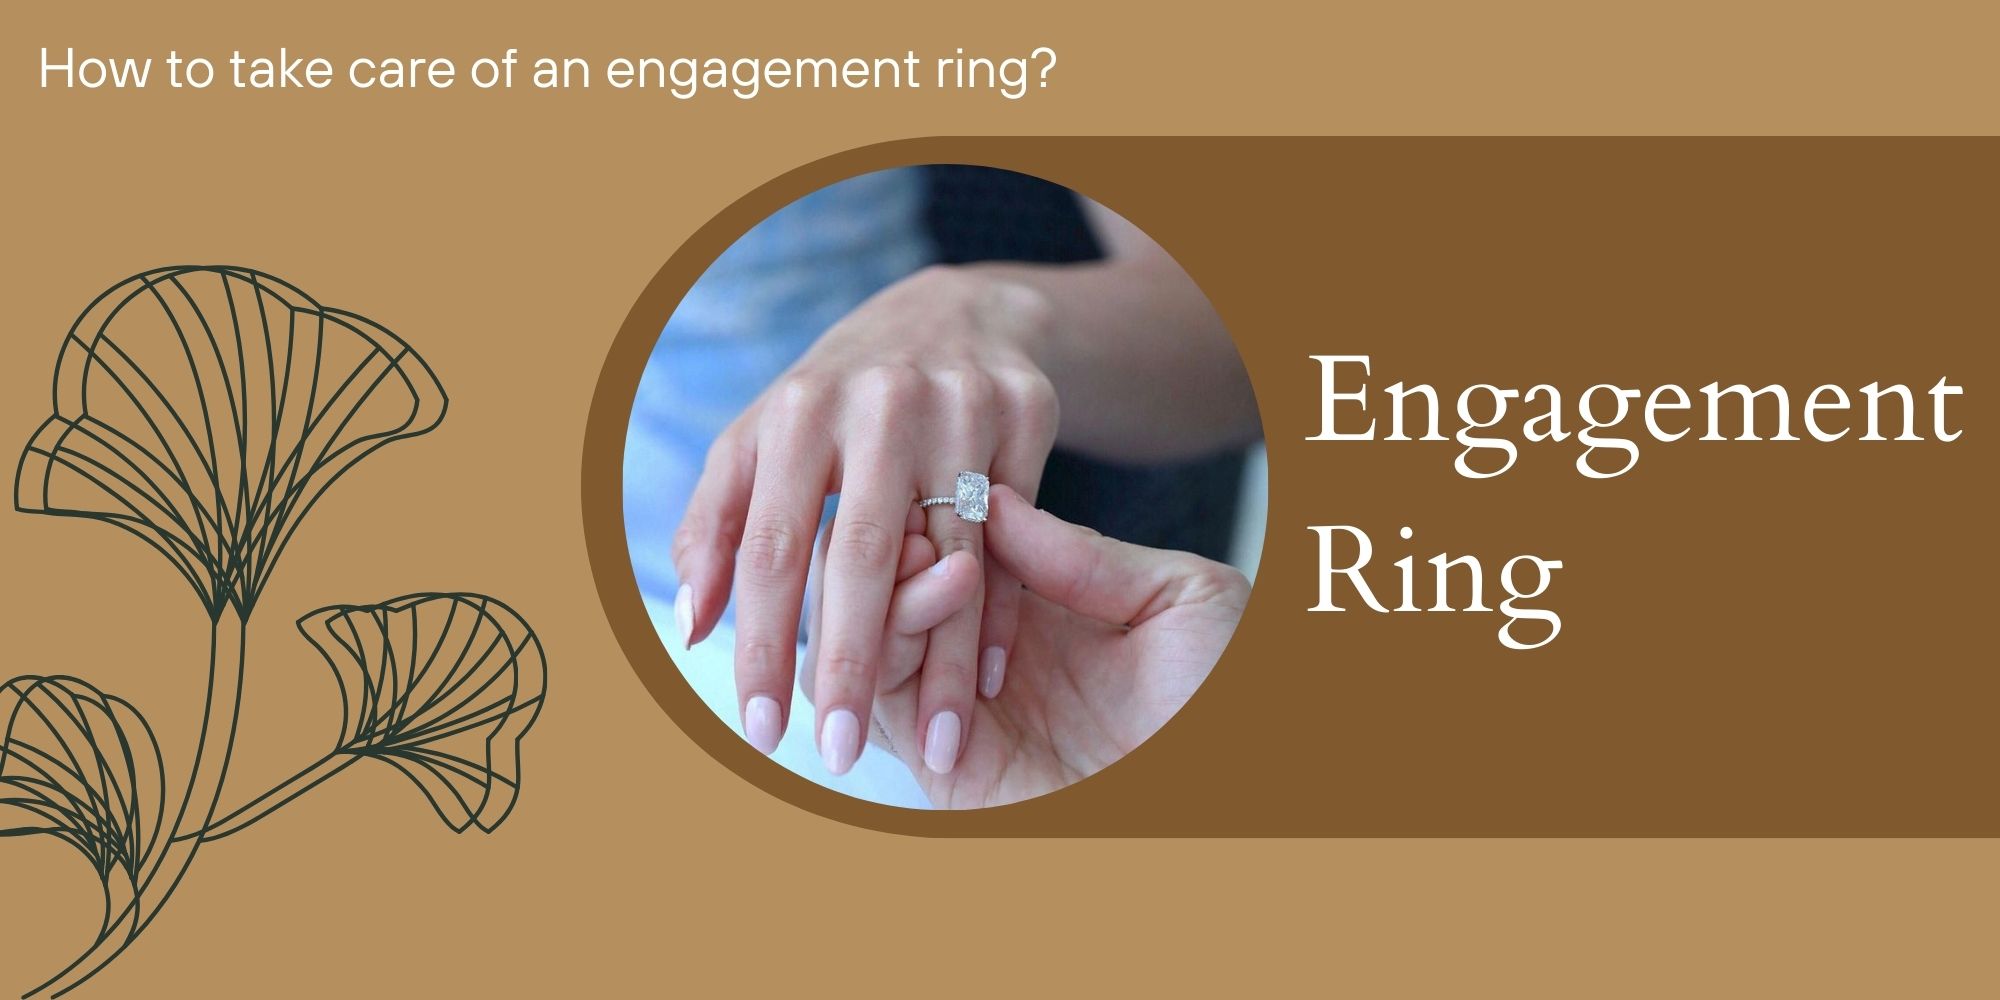 How to take care of an Engagement Ring?